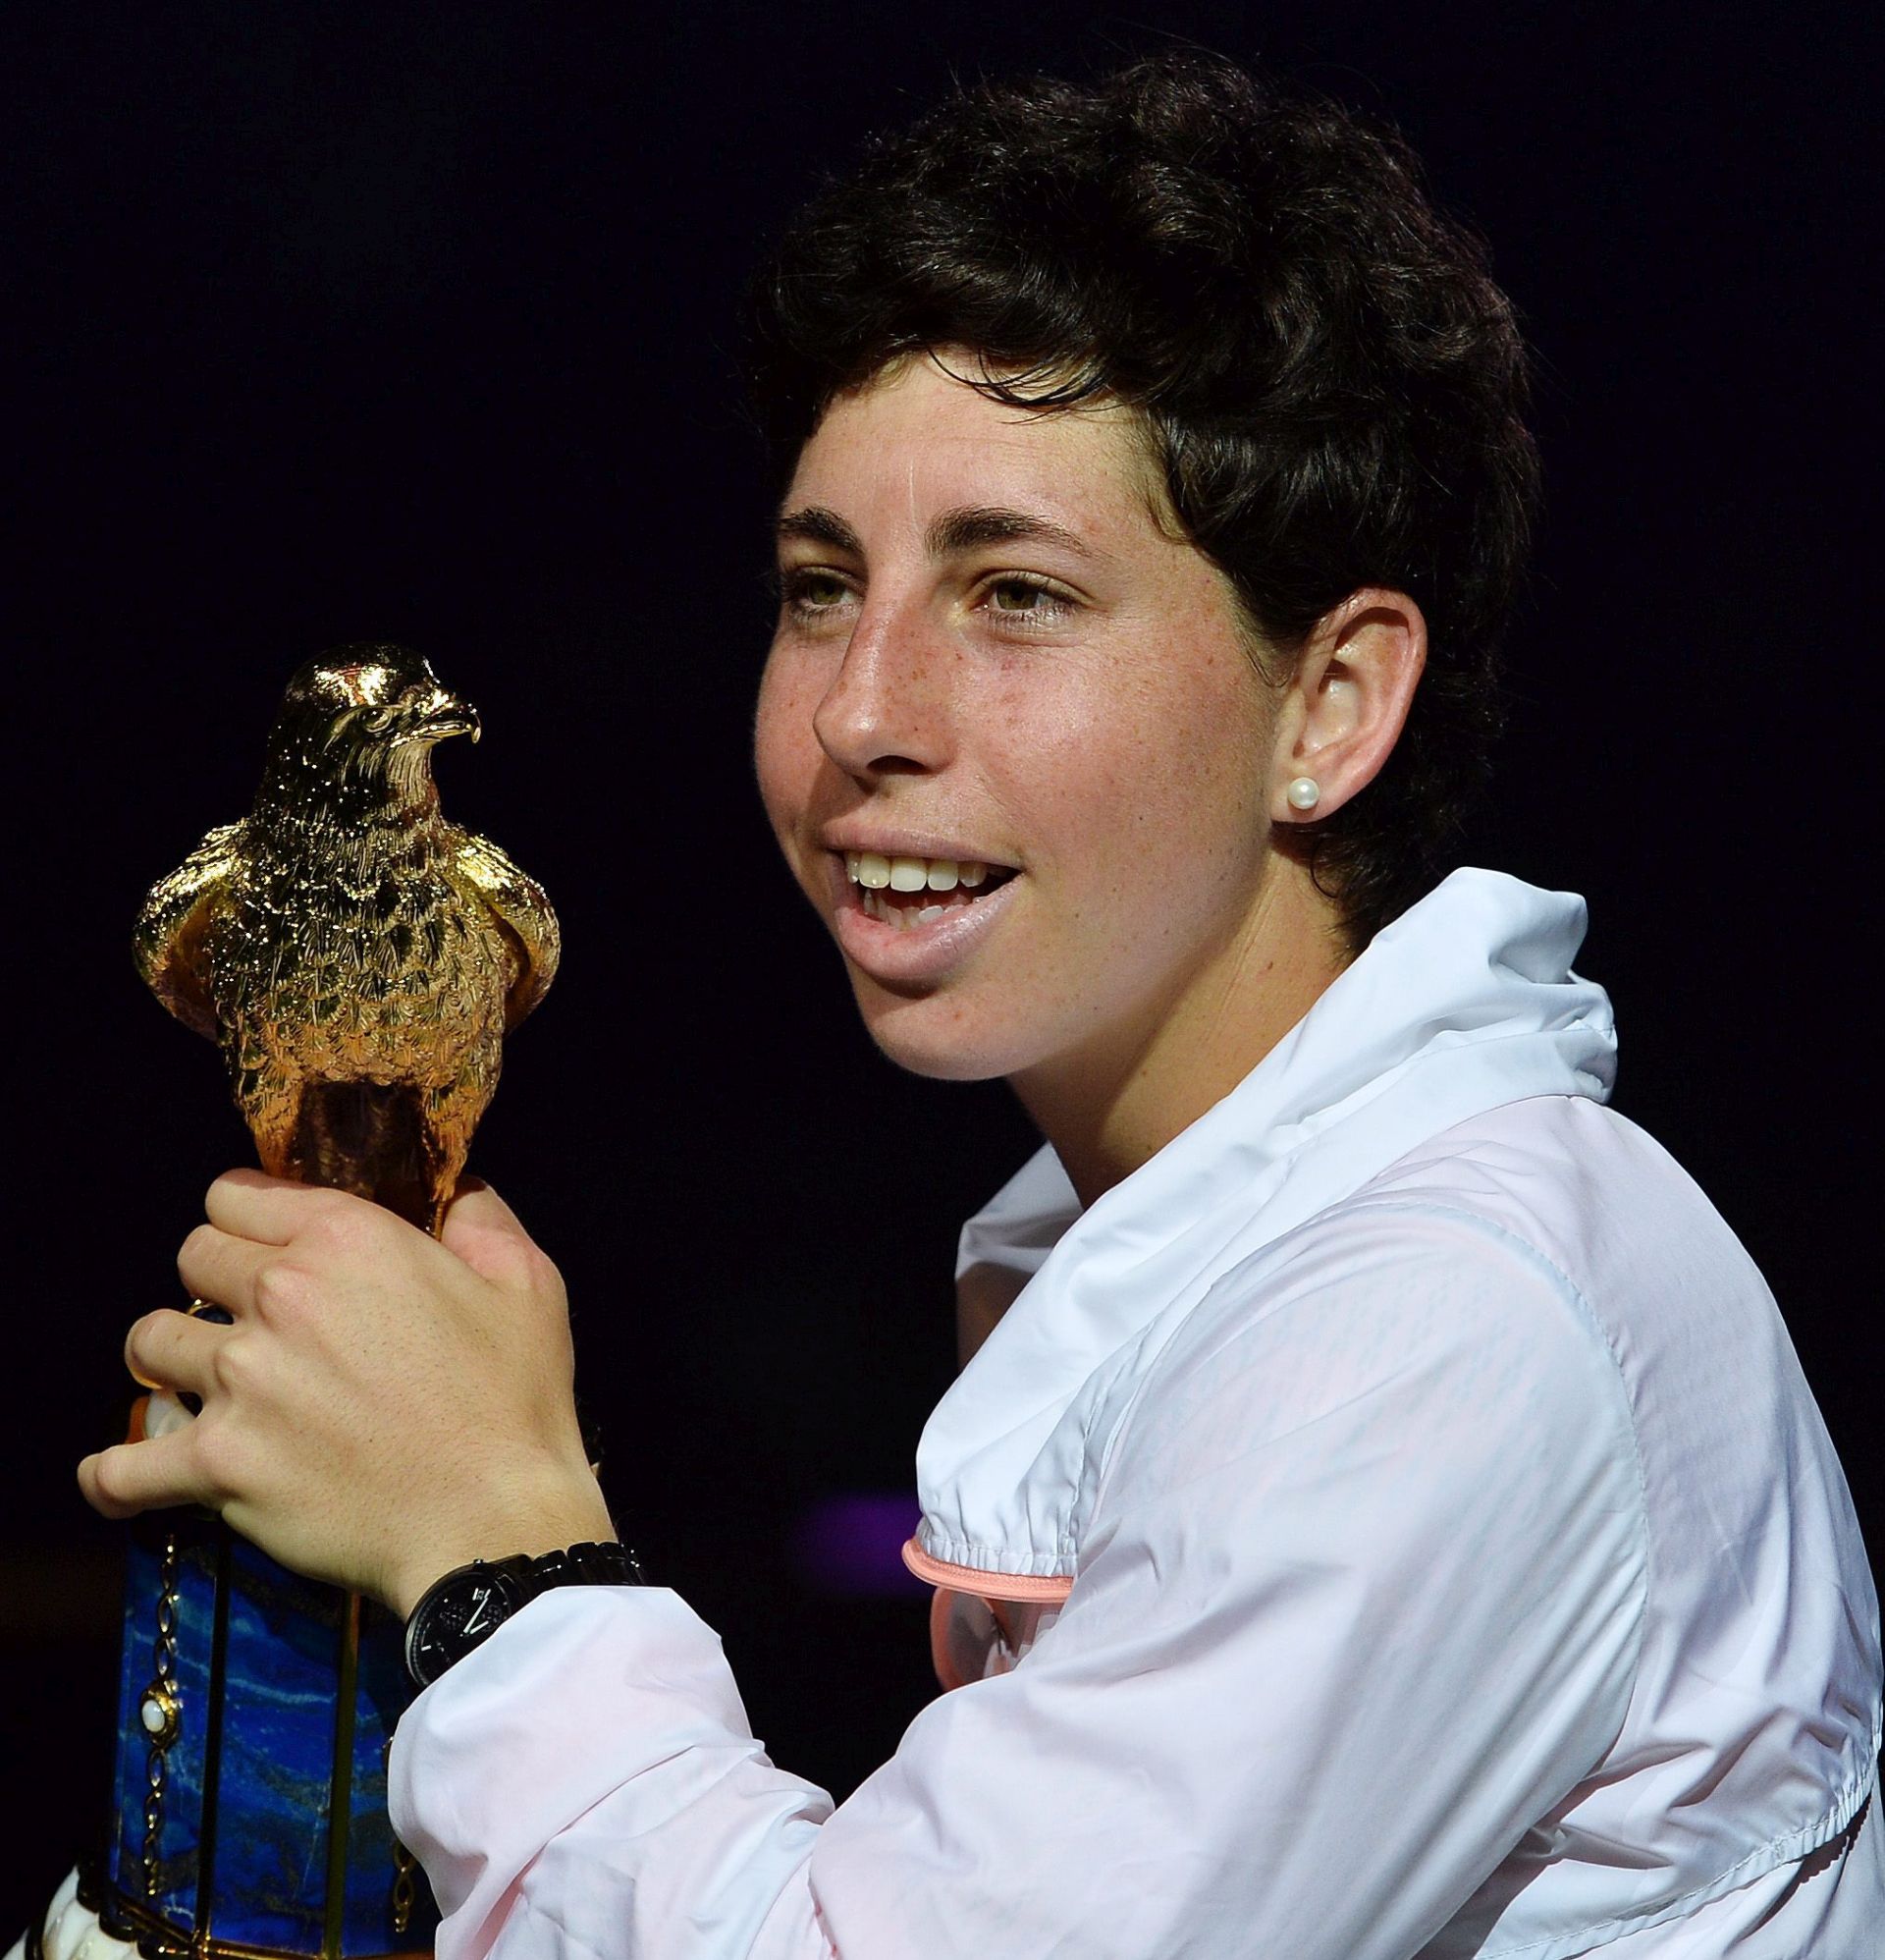 epa05184098 Carla Suarez Navarro of Spain poses with her trophy after beating her opponent Jelena Ostapenko of Latvia during their final match  of the WTA Qatar Ladies Open at the International Khalifa Tennis Complex Doha, Qatar on 27 February 2016  EPA/-